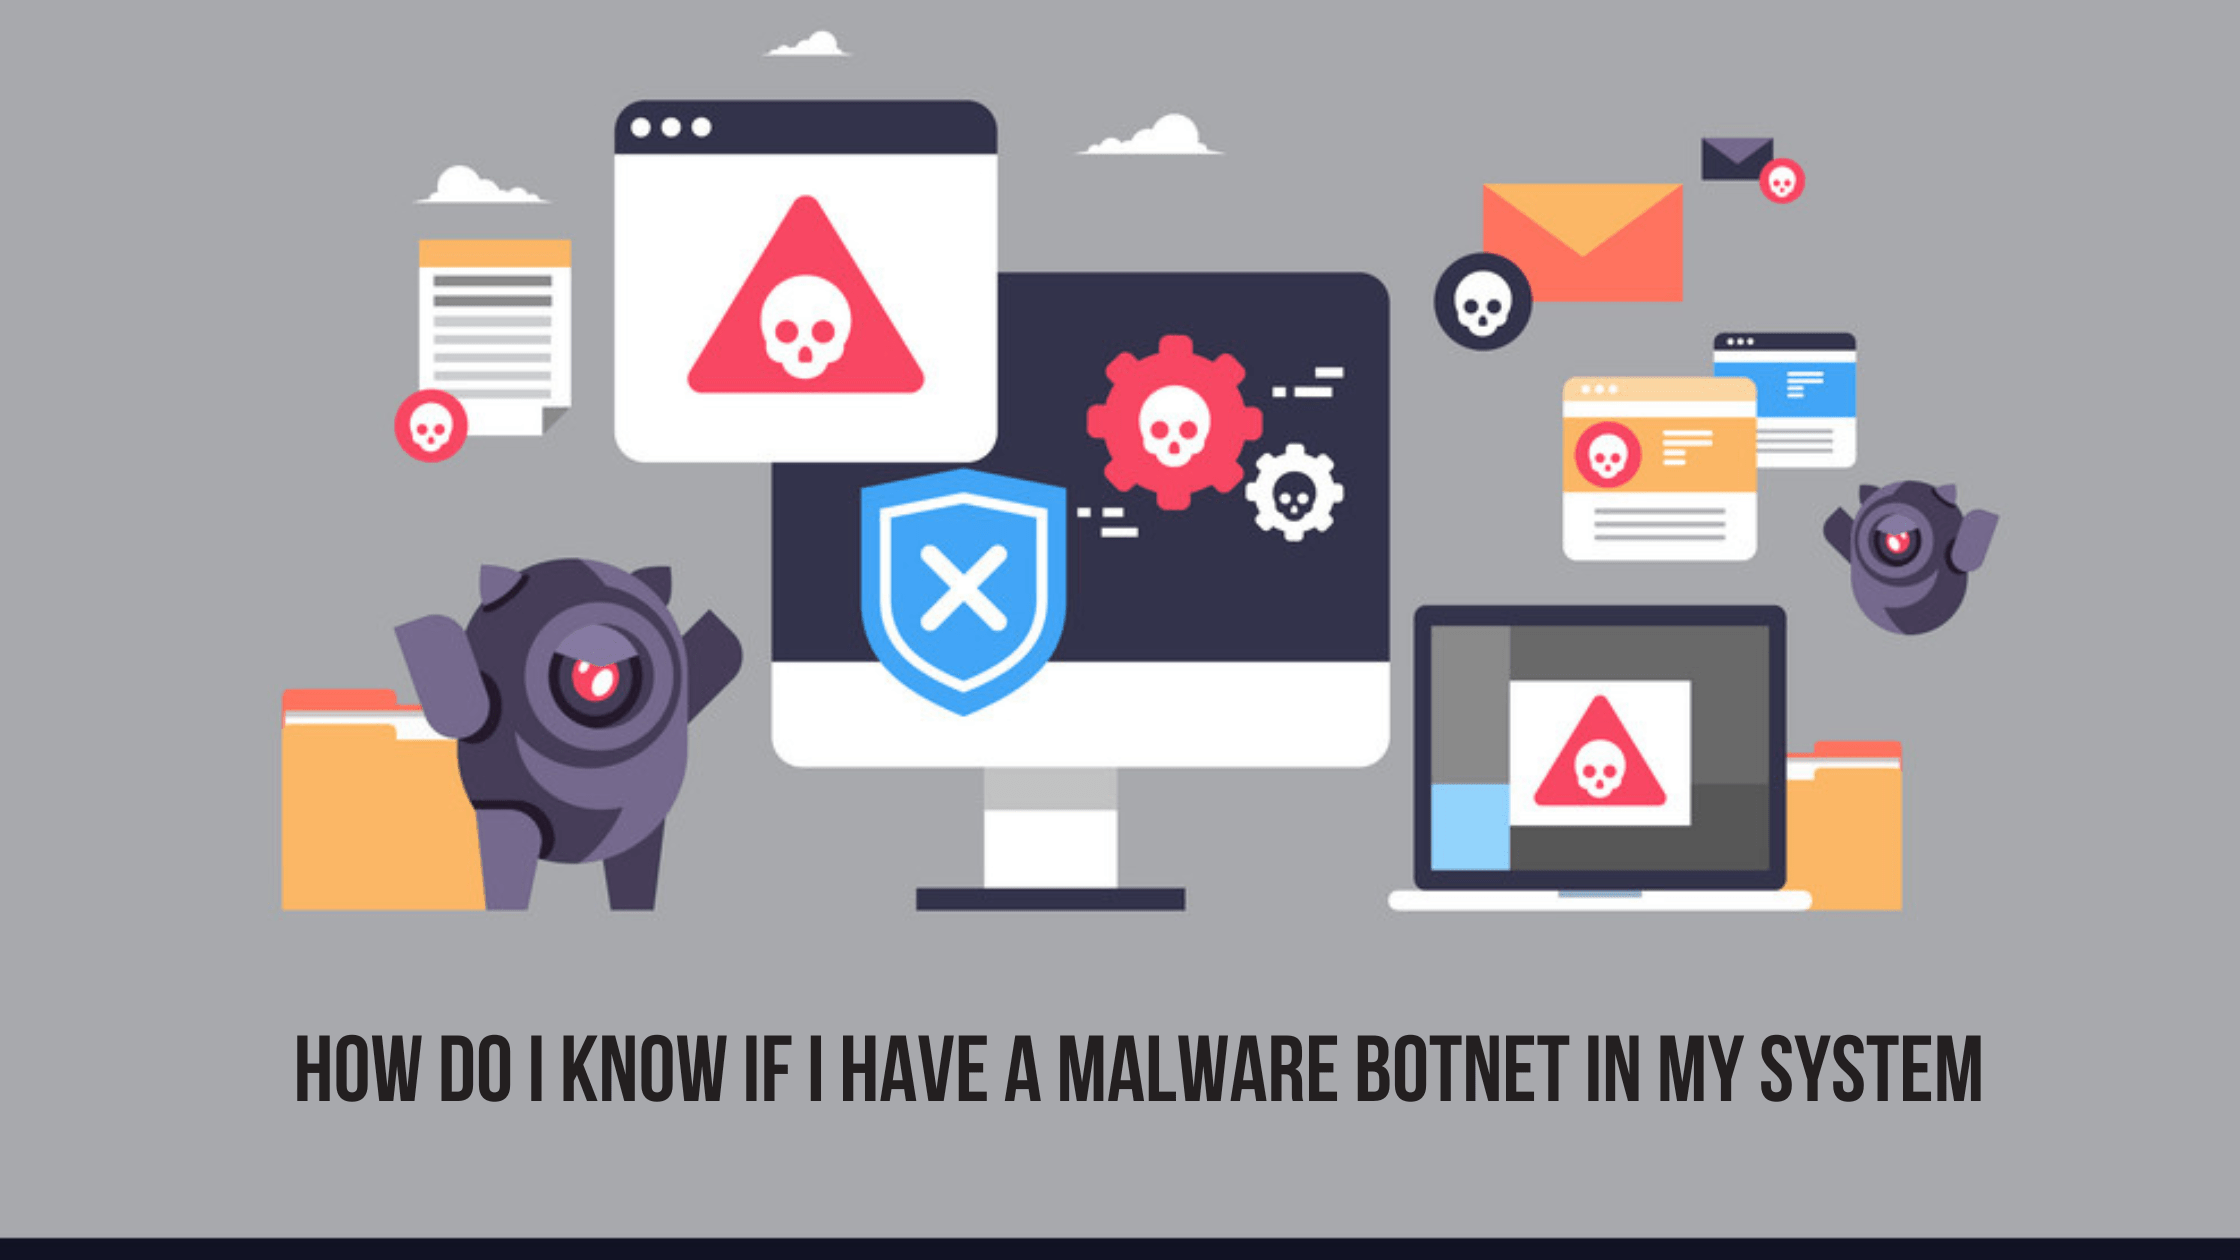 How do I know if I have a malware botnet in my system